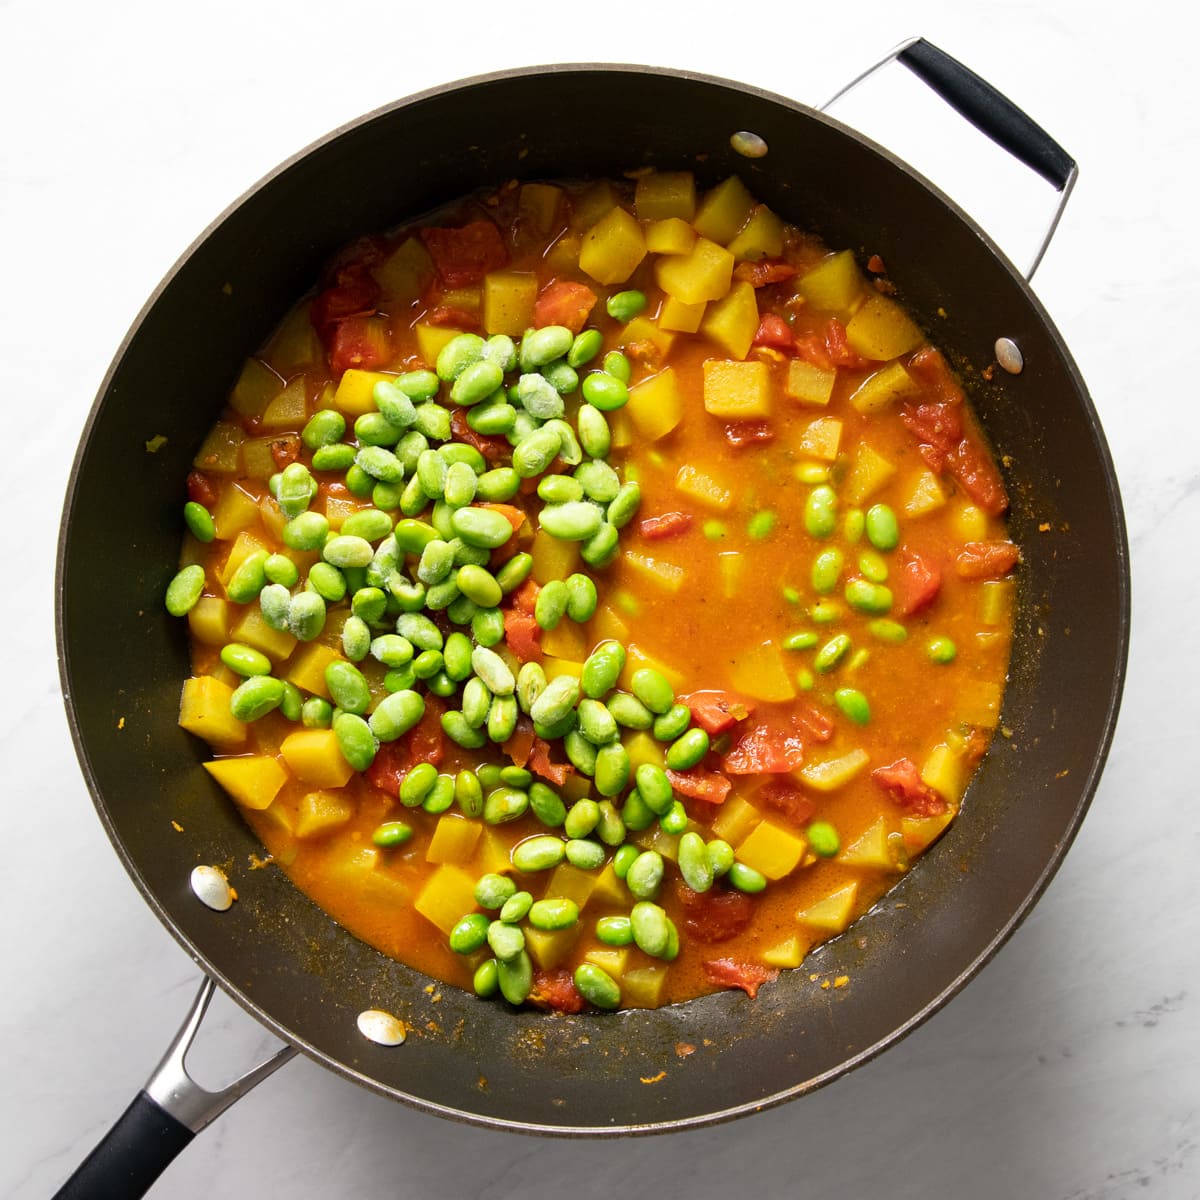 Frozen shelled edamame have just been added to a skillet filled with a cooked curry containing diced potatoes and canned tomatoes. 